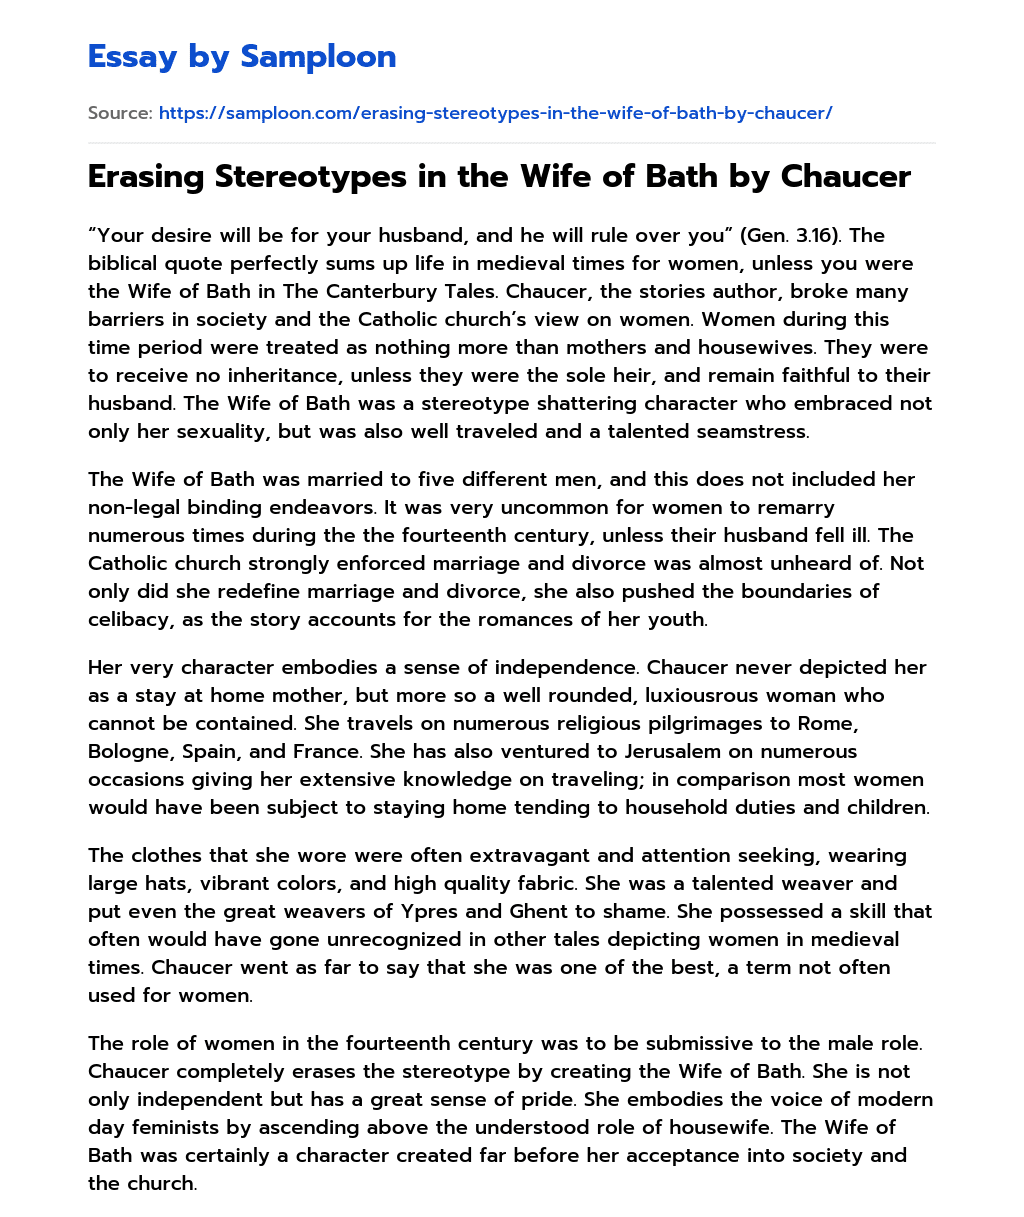 Erasing Stereotypes in the Wife of Bath by Chaucer essay